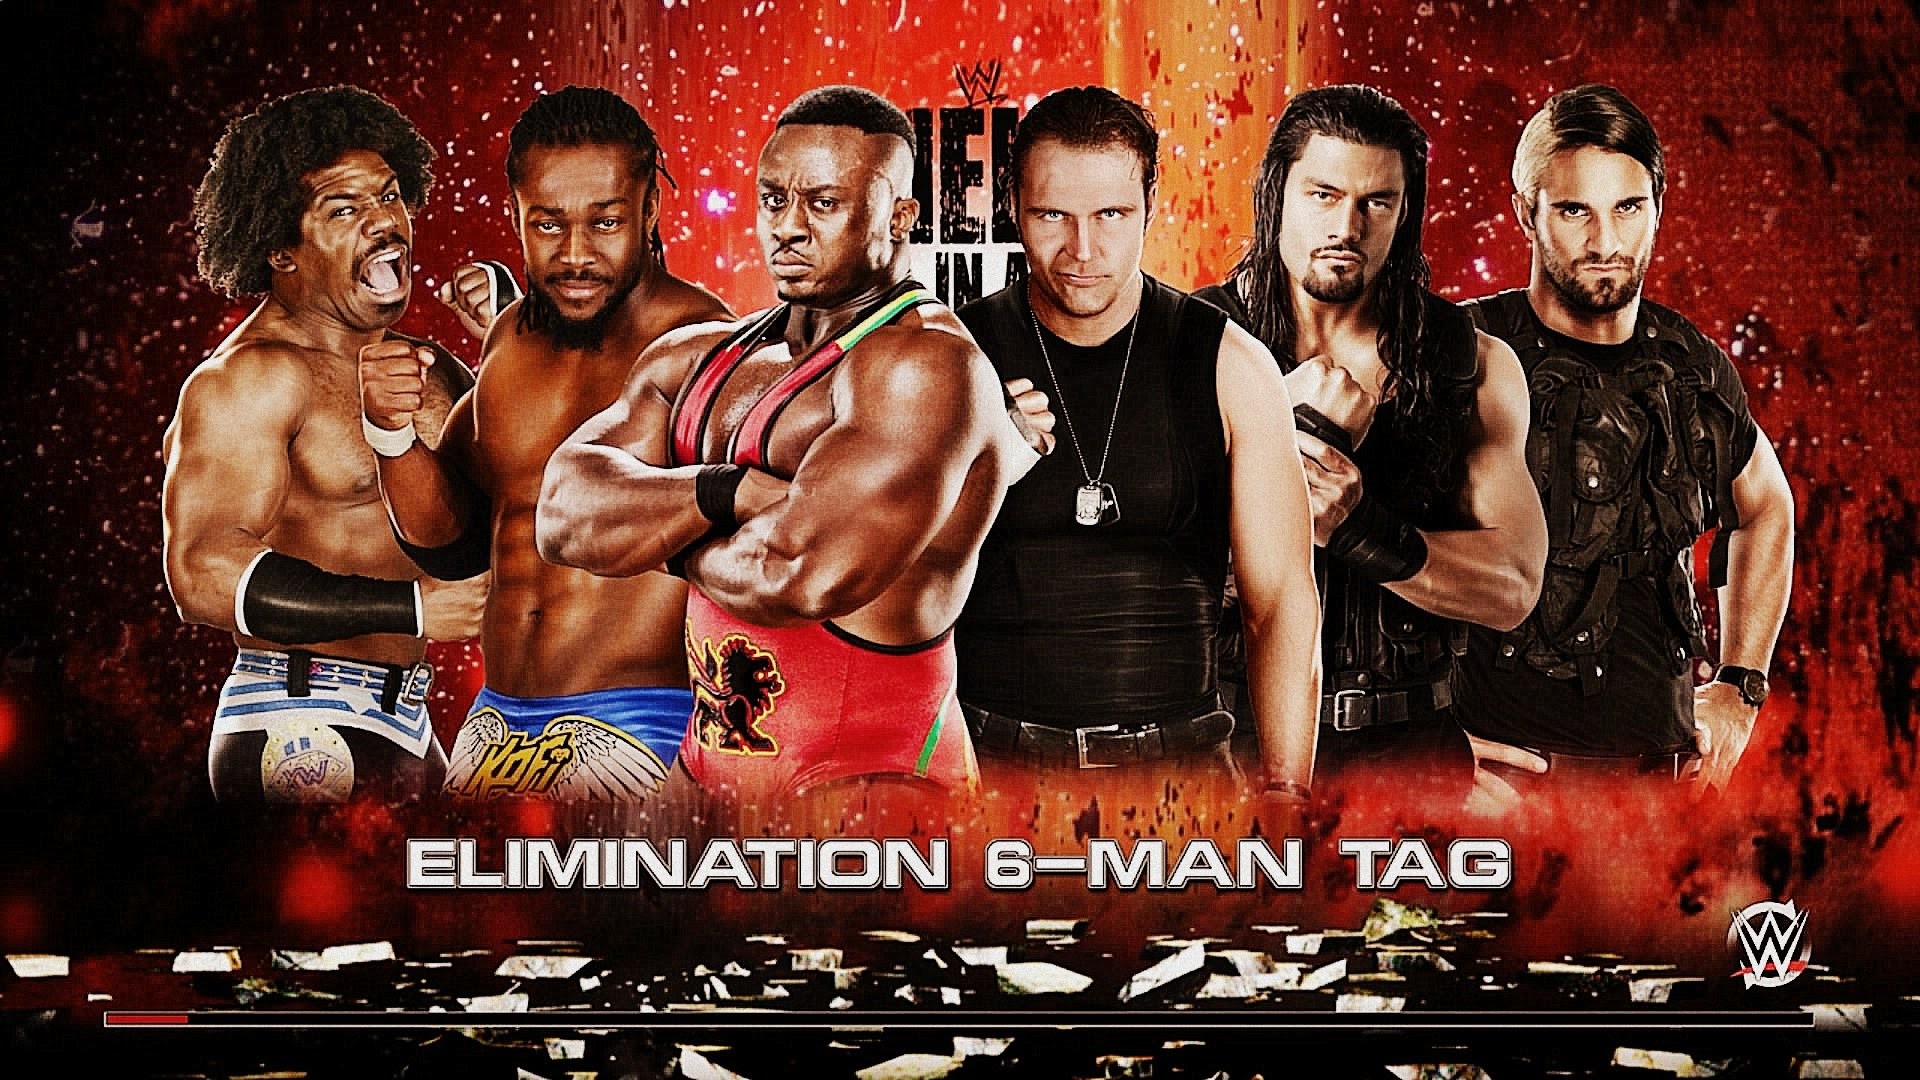 1920x1080 Elimination 6 Man Tag Match, The New Day vs The Shield [WWE 2K15] - YouTube